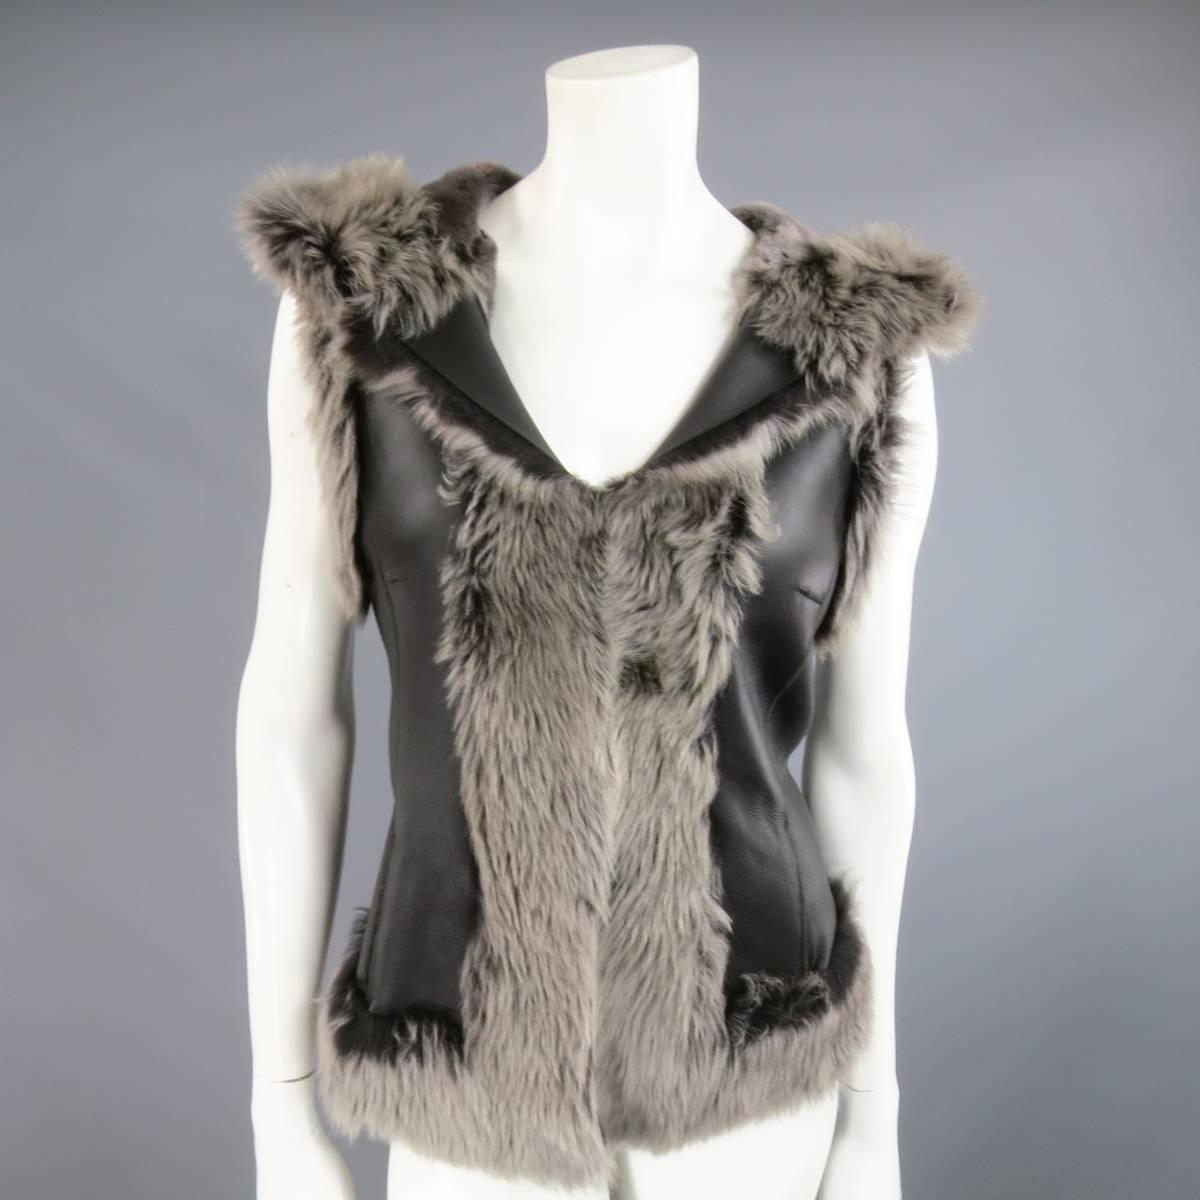 Gorgeous ROSENBERG & LENHART winter vest in black leather lamb shearling with gray fur featuring hook eye closures, side pockets, and a hood. Made in Germany.
 
Good Pre-Owned Condition.
Marked: FR 40
 
Measurements:
 
Shoulder: 15 in.
Bust: